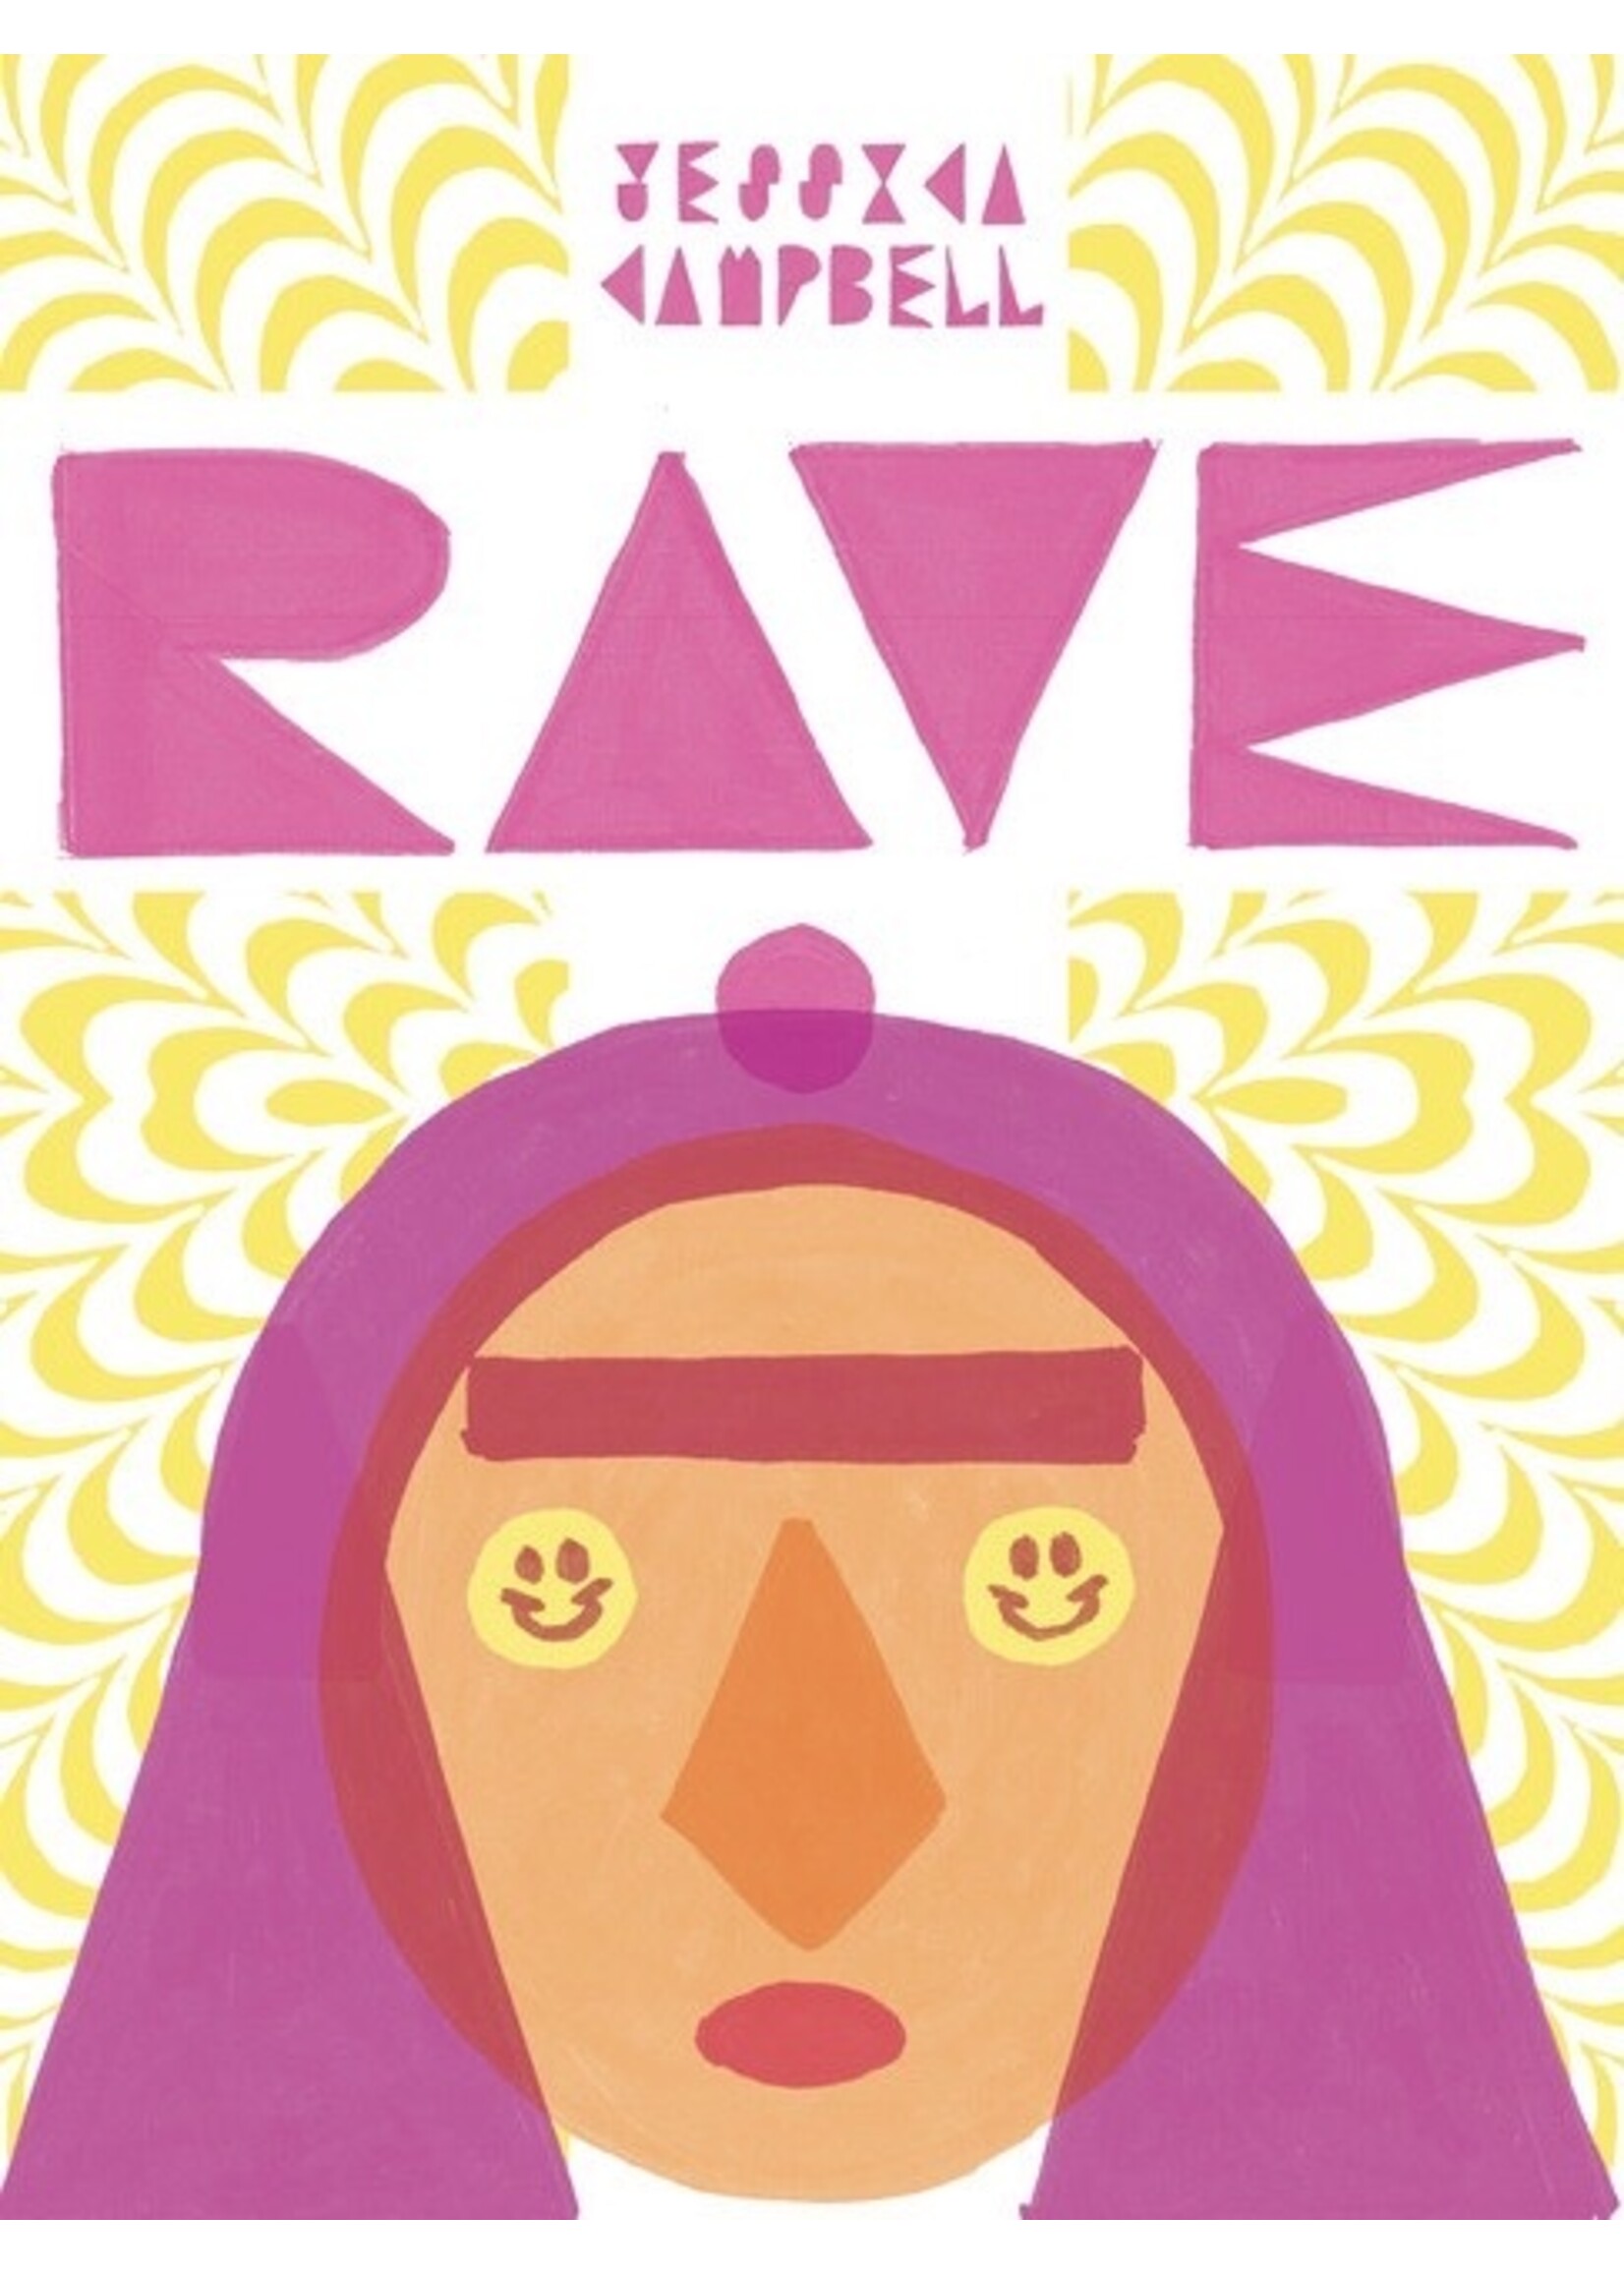 Drawn & Quarterly "Rave" by Jessica Campbell, Drawn & Quarterly